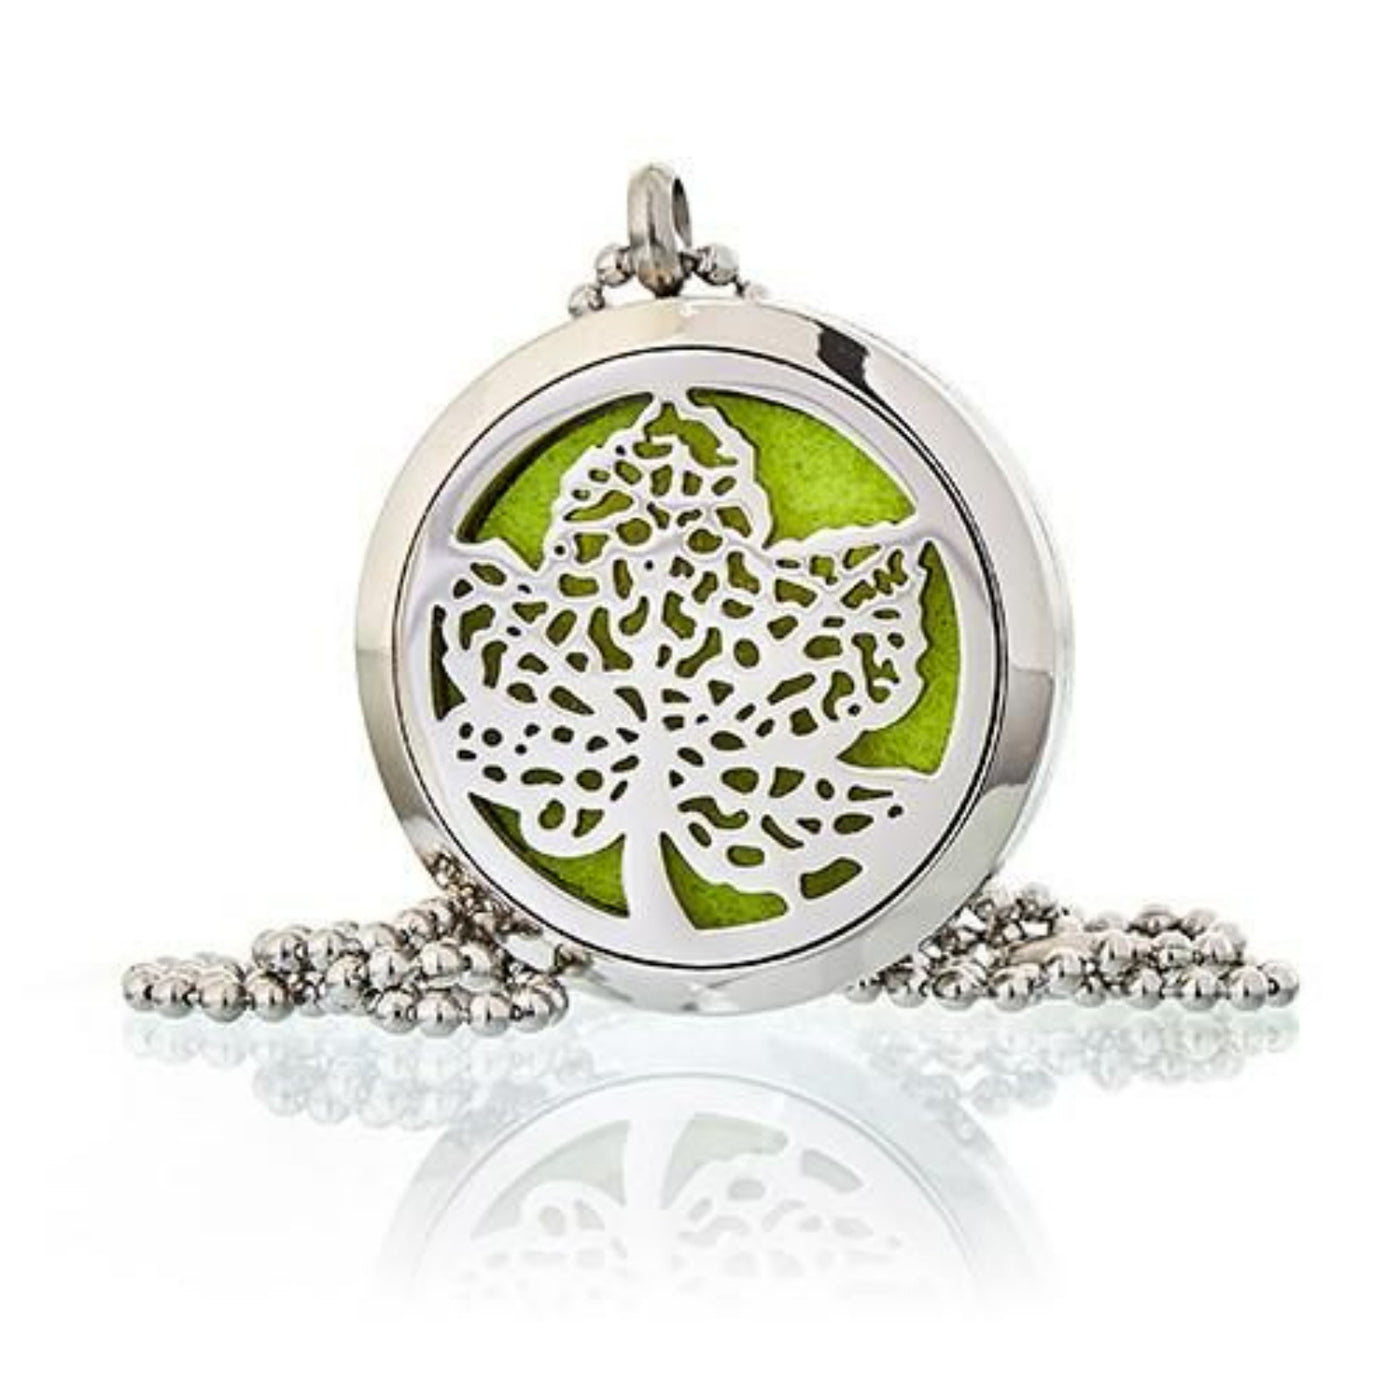 Aromatherapy Diffuser Necklace - Leaf 30mm.